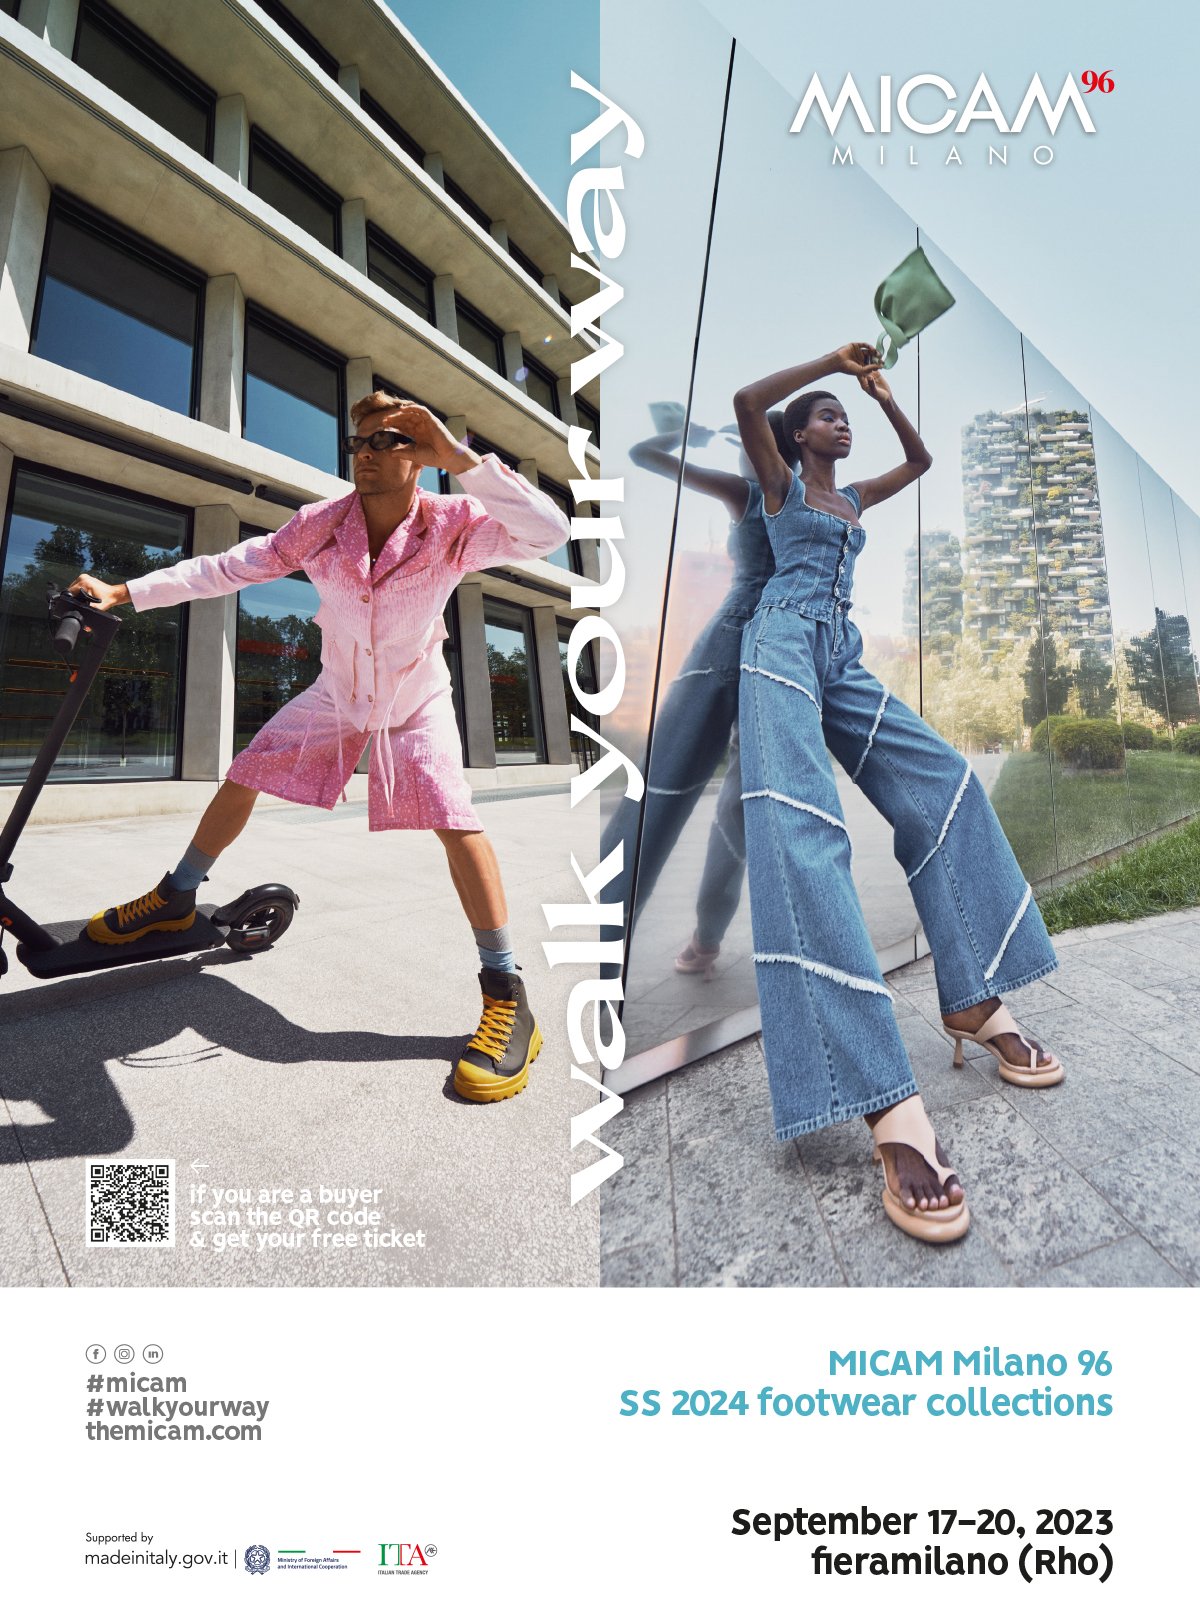 “WALK YOUR WAY”: individuality and personality at the heart of the new MICAM campaign